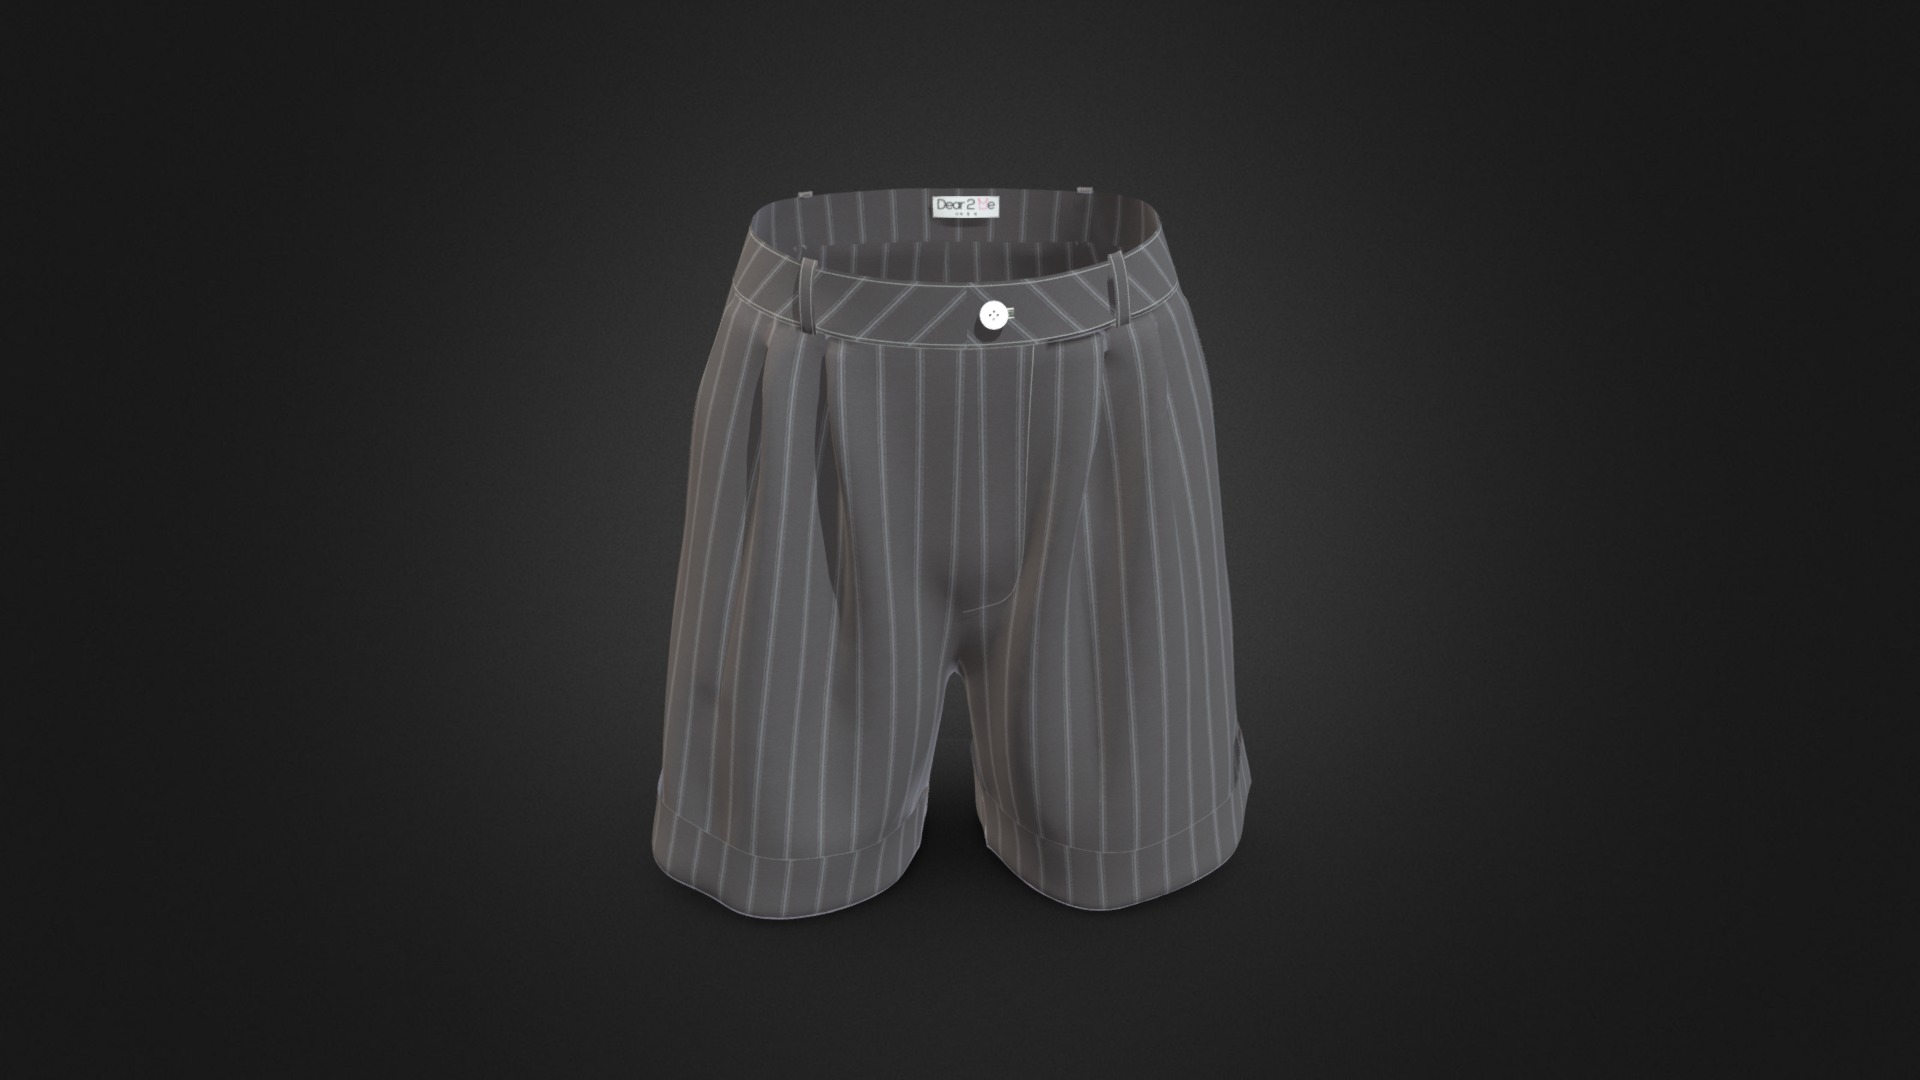 3D model 2-tuck roll-up shorts - This is a 3D model of the 2-tuck roll-up shorts. The 3D model is about a white and black shirt.